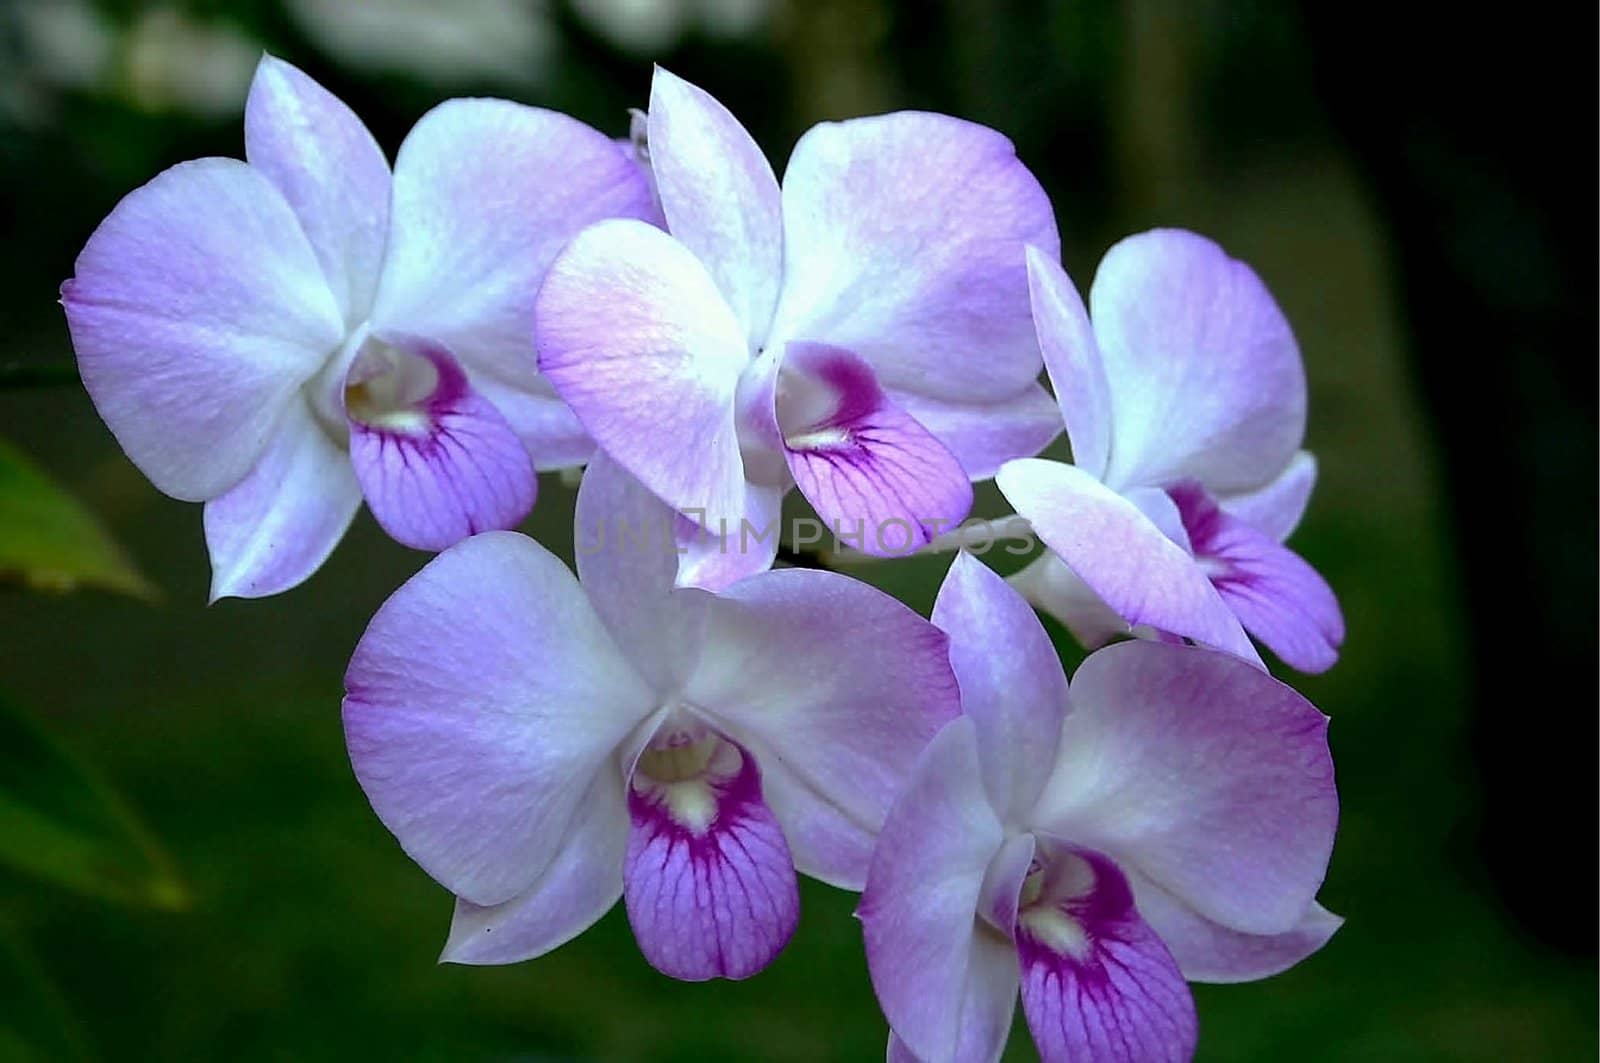 Group of five purple orchids under the sun